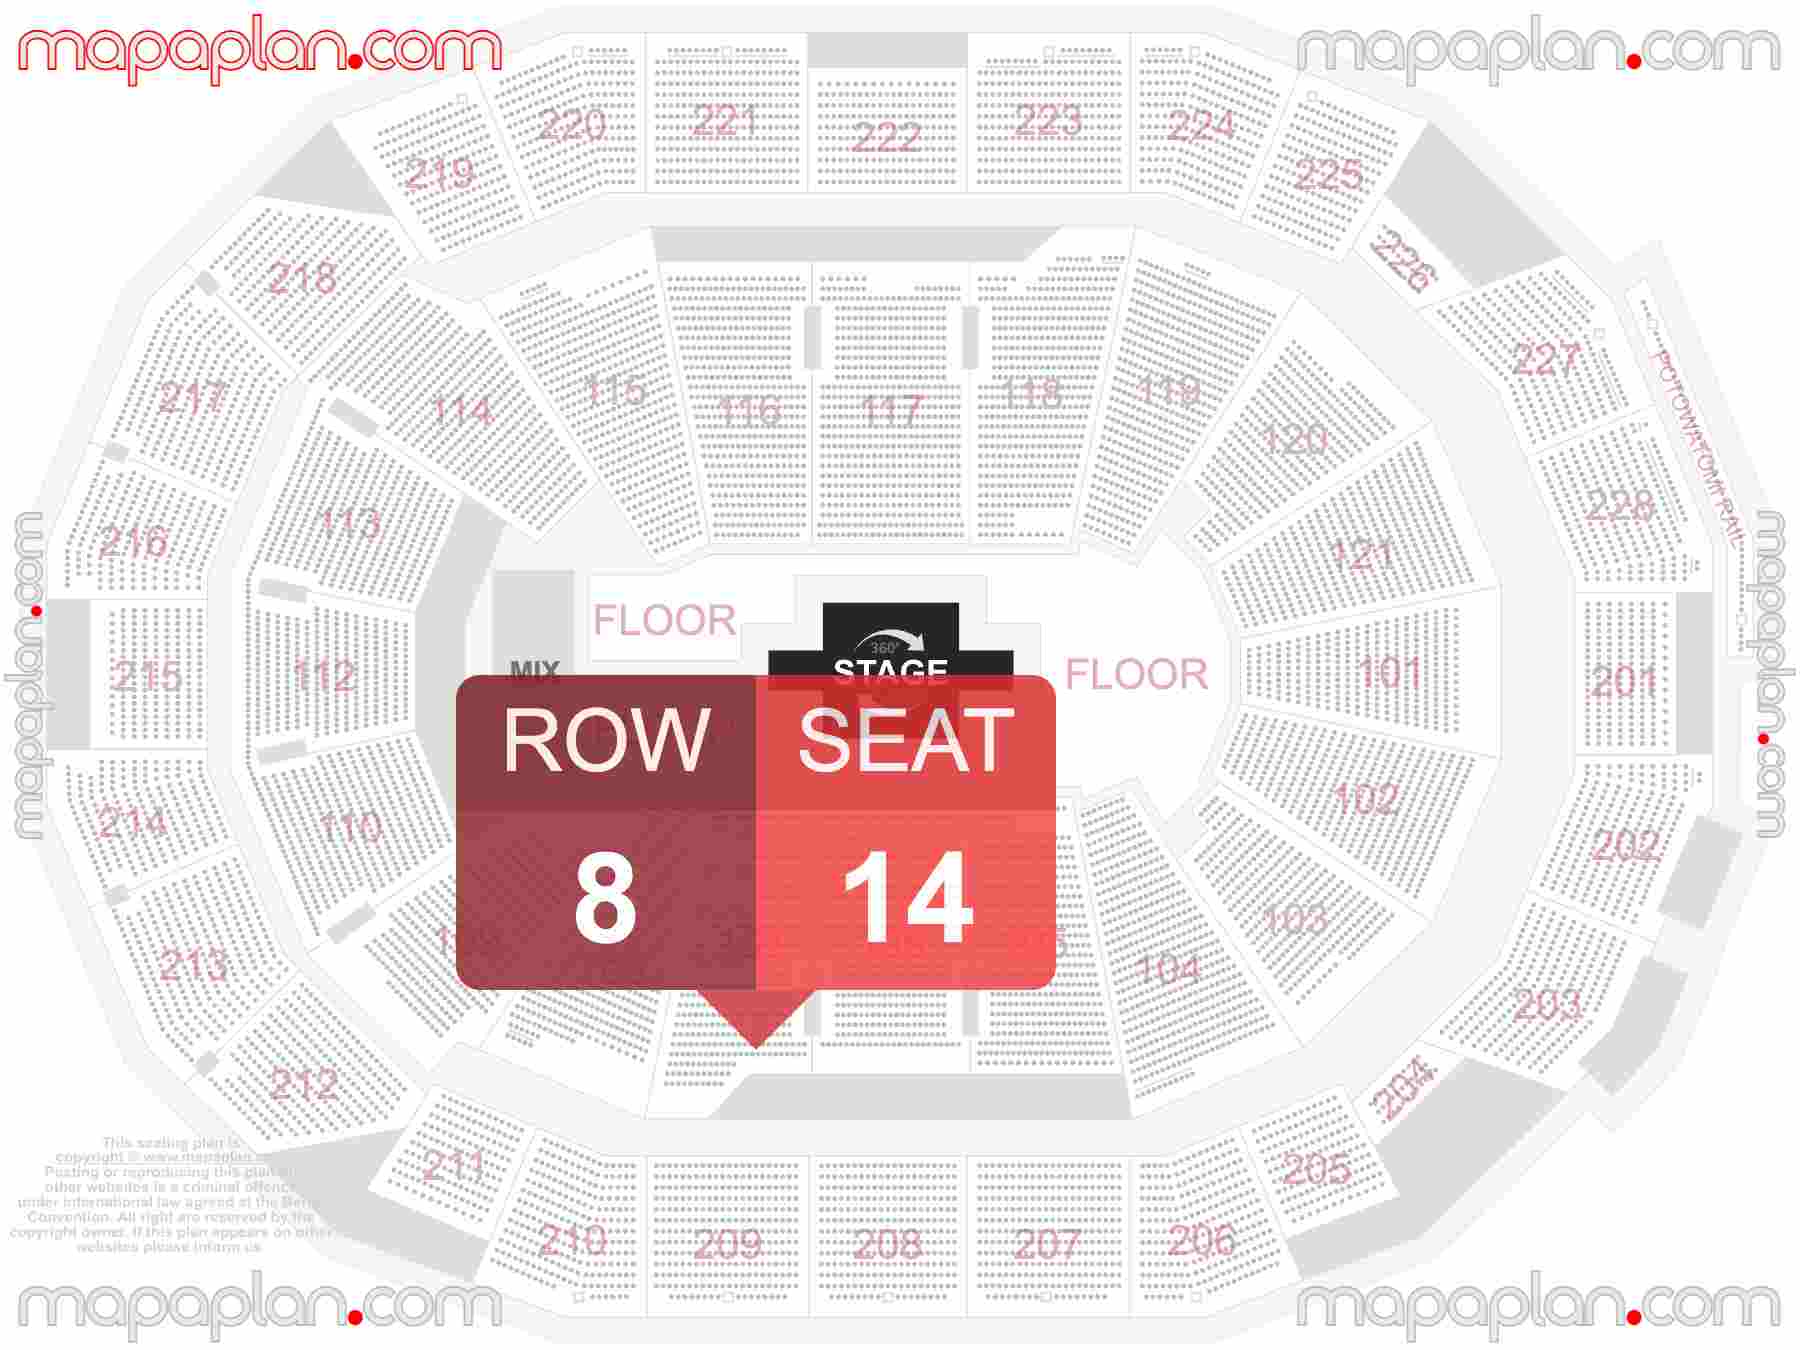 Milwaukee Fiserv Forum seating chart In the round concert 360 stage seating chart with exact section numbers showing best rows and seats selection 3d layout - Best interactive seat finder tool with precise detailed location data